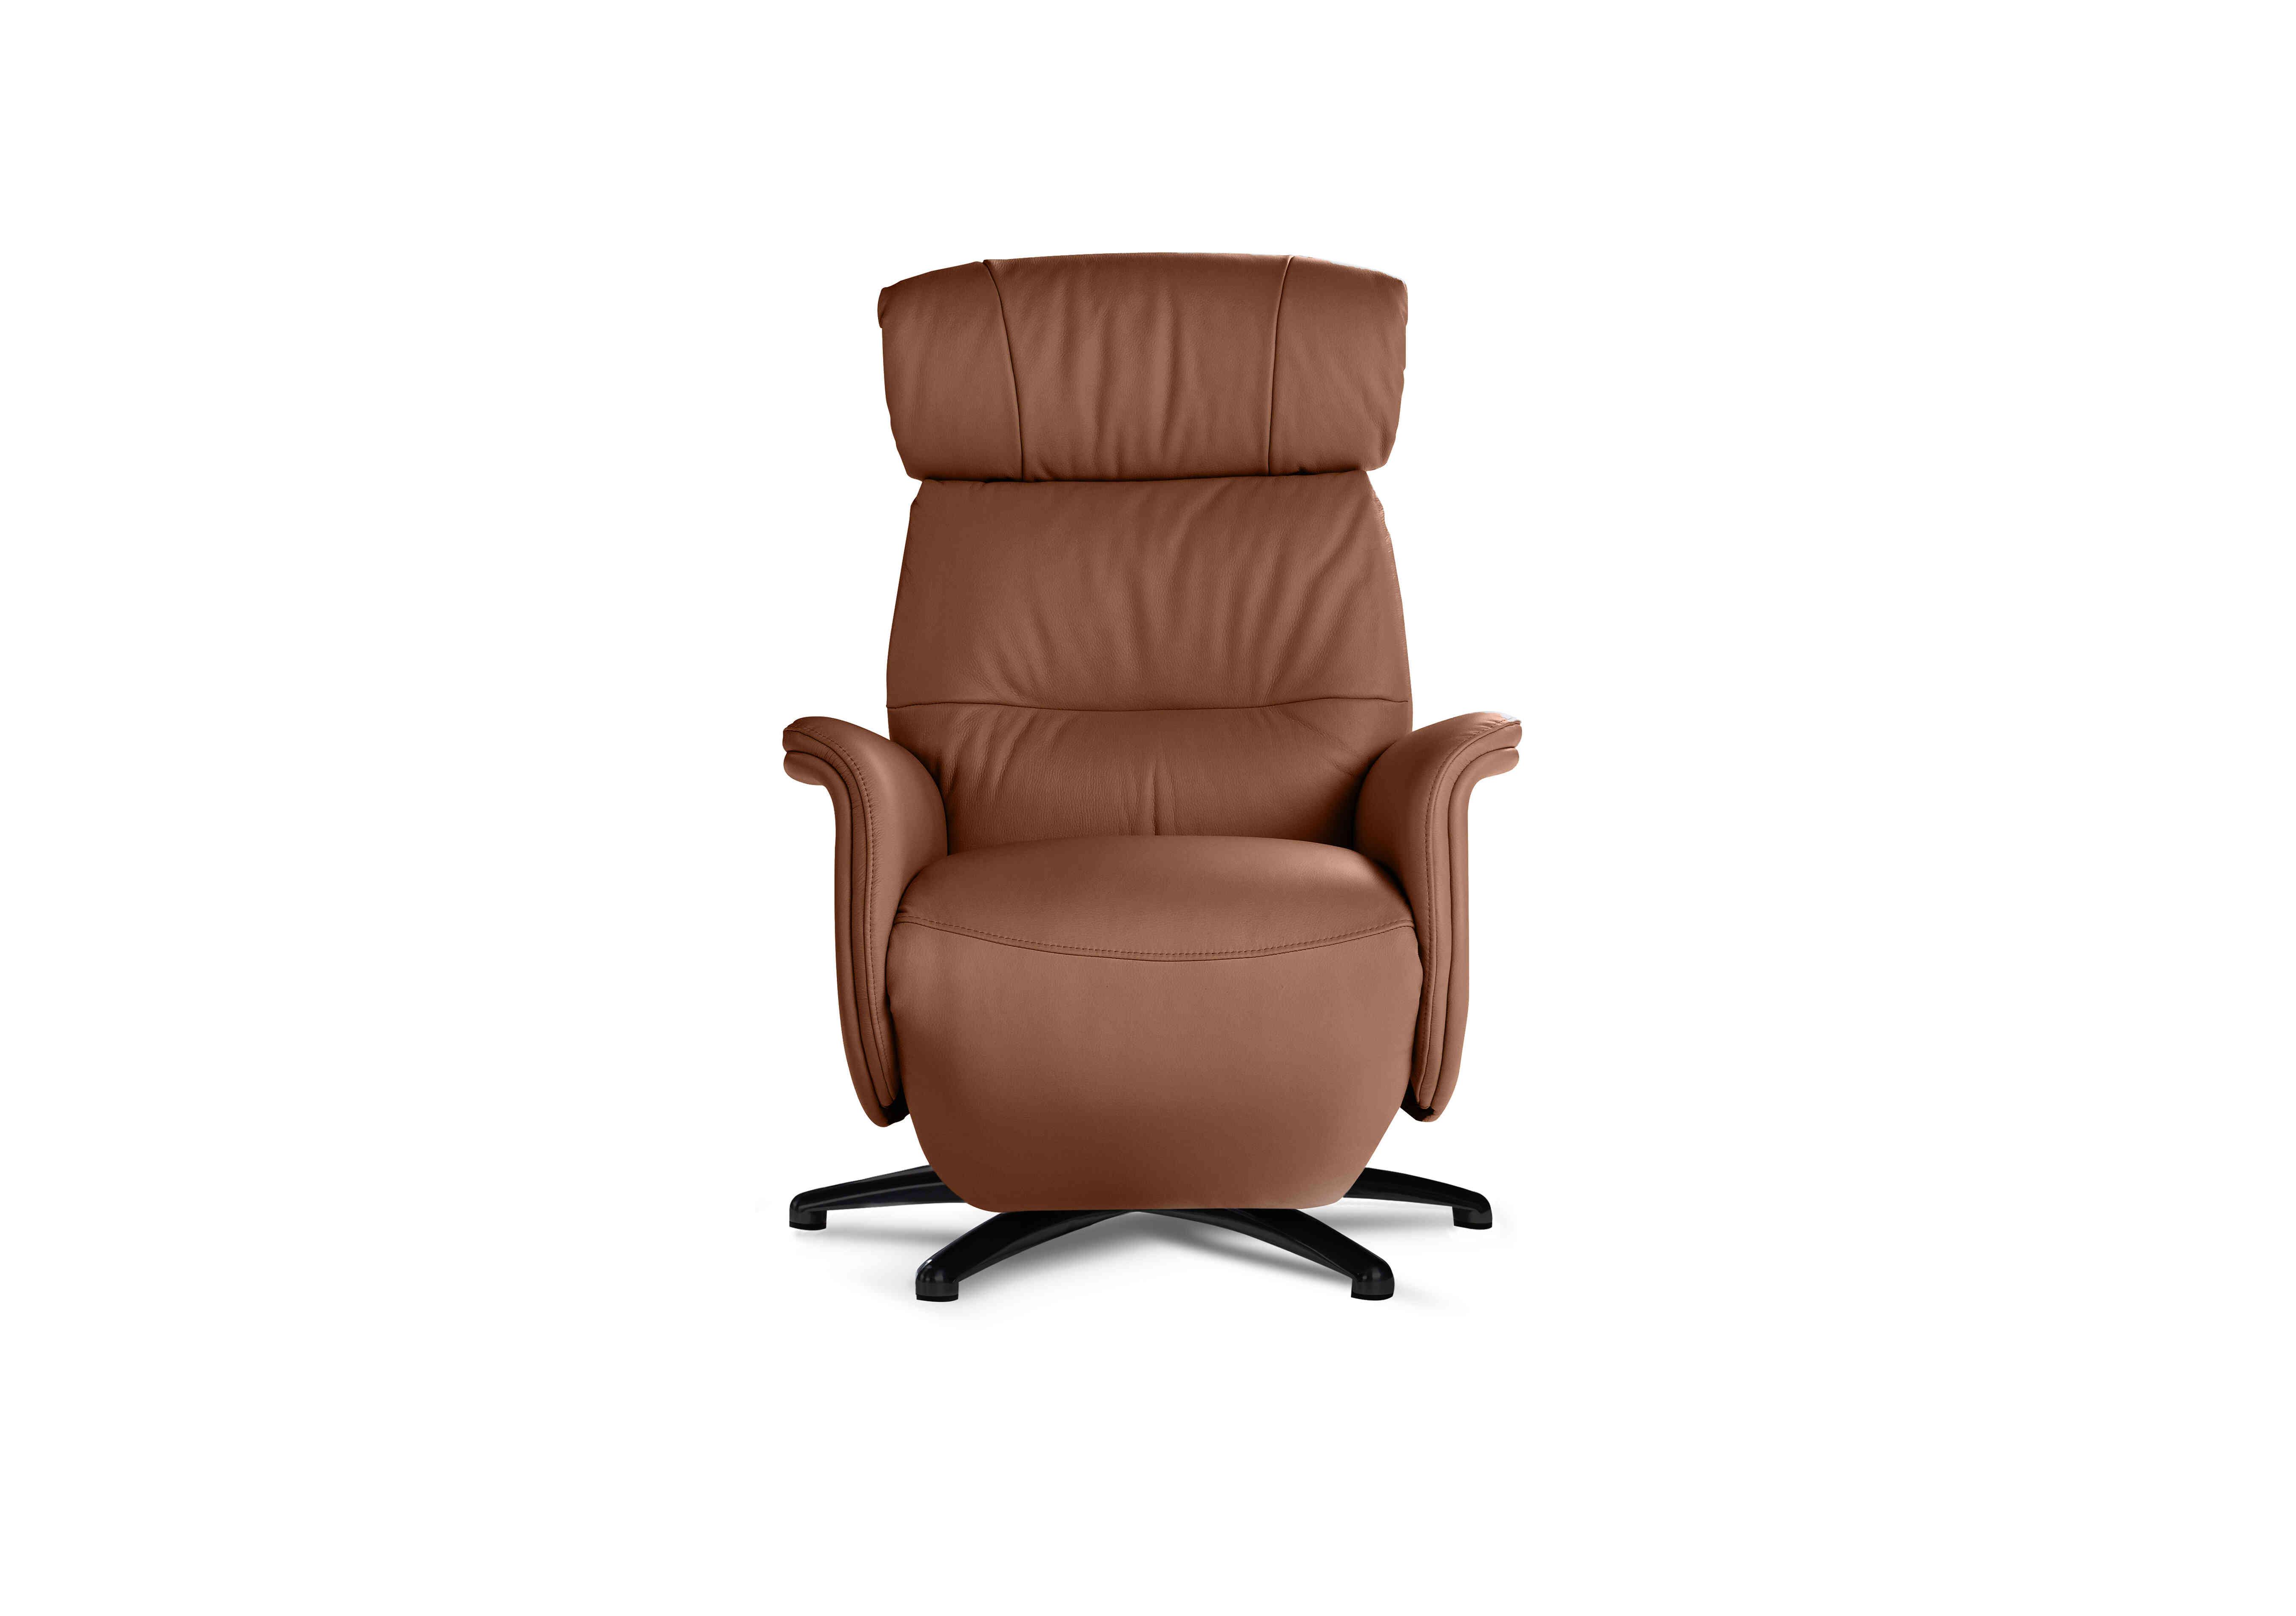 Tricolour Vincenzo Leather Swivel Power Recliner Chair in Torello 363 Cognac An Ft on Furniture Village